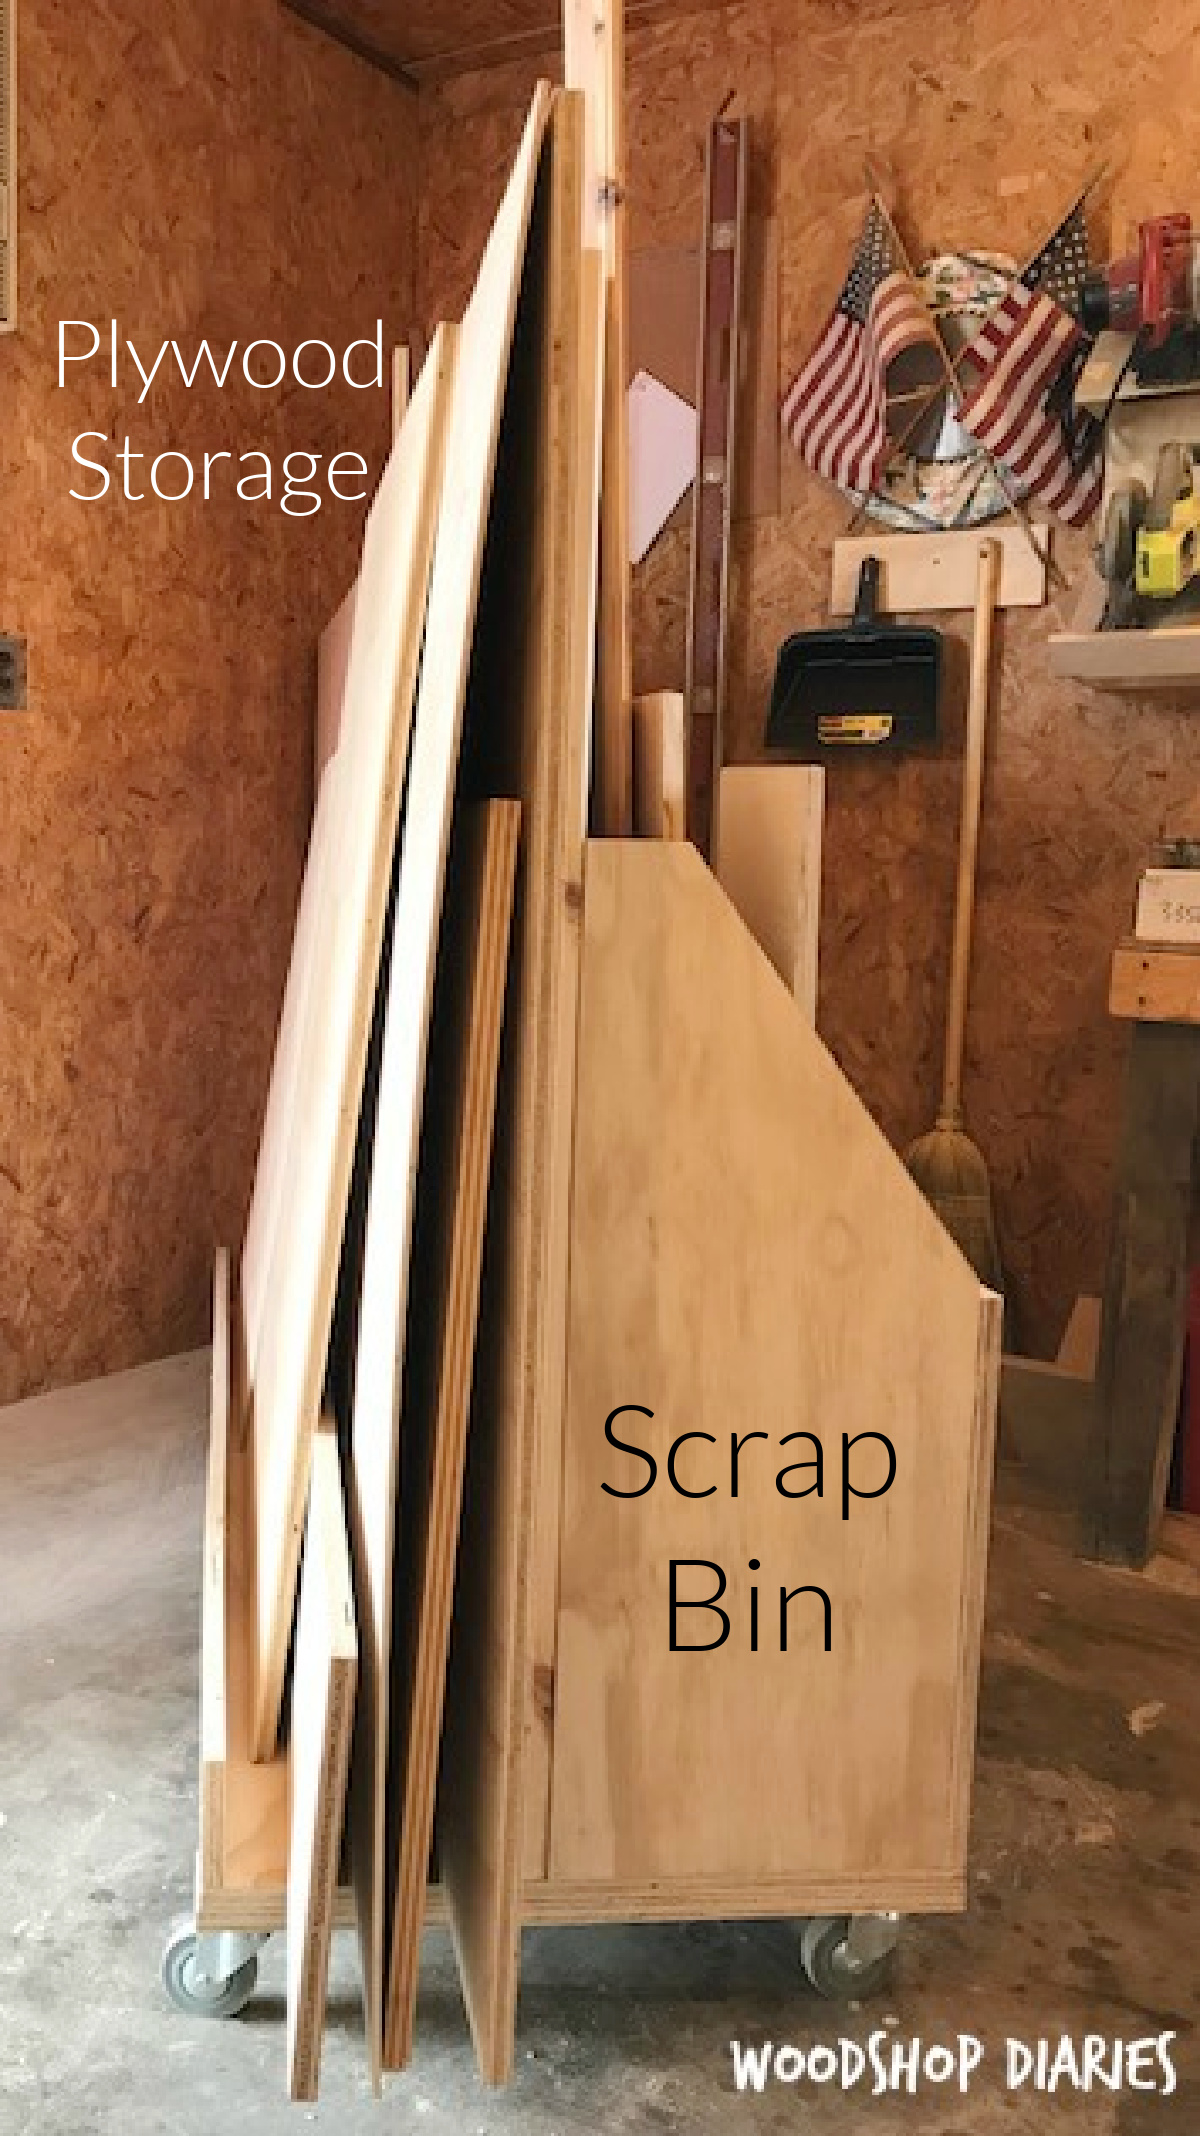 Scrap wood and plywood storage cart loaded up with lumber.  Text designating which side is scraps and which side is for plywood